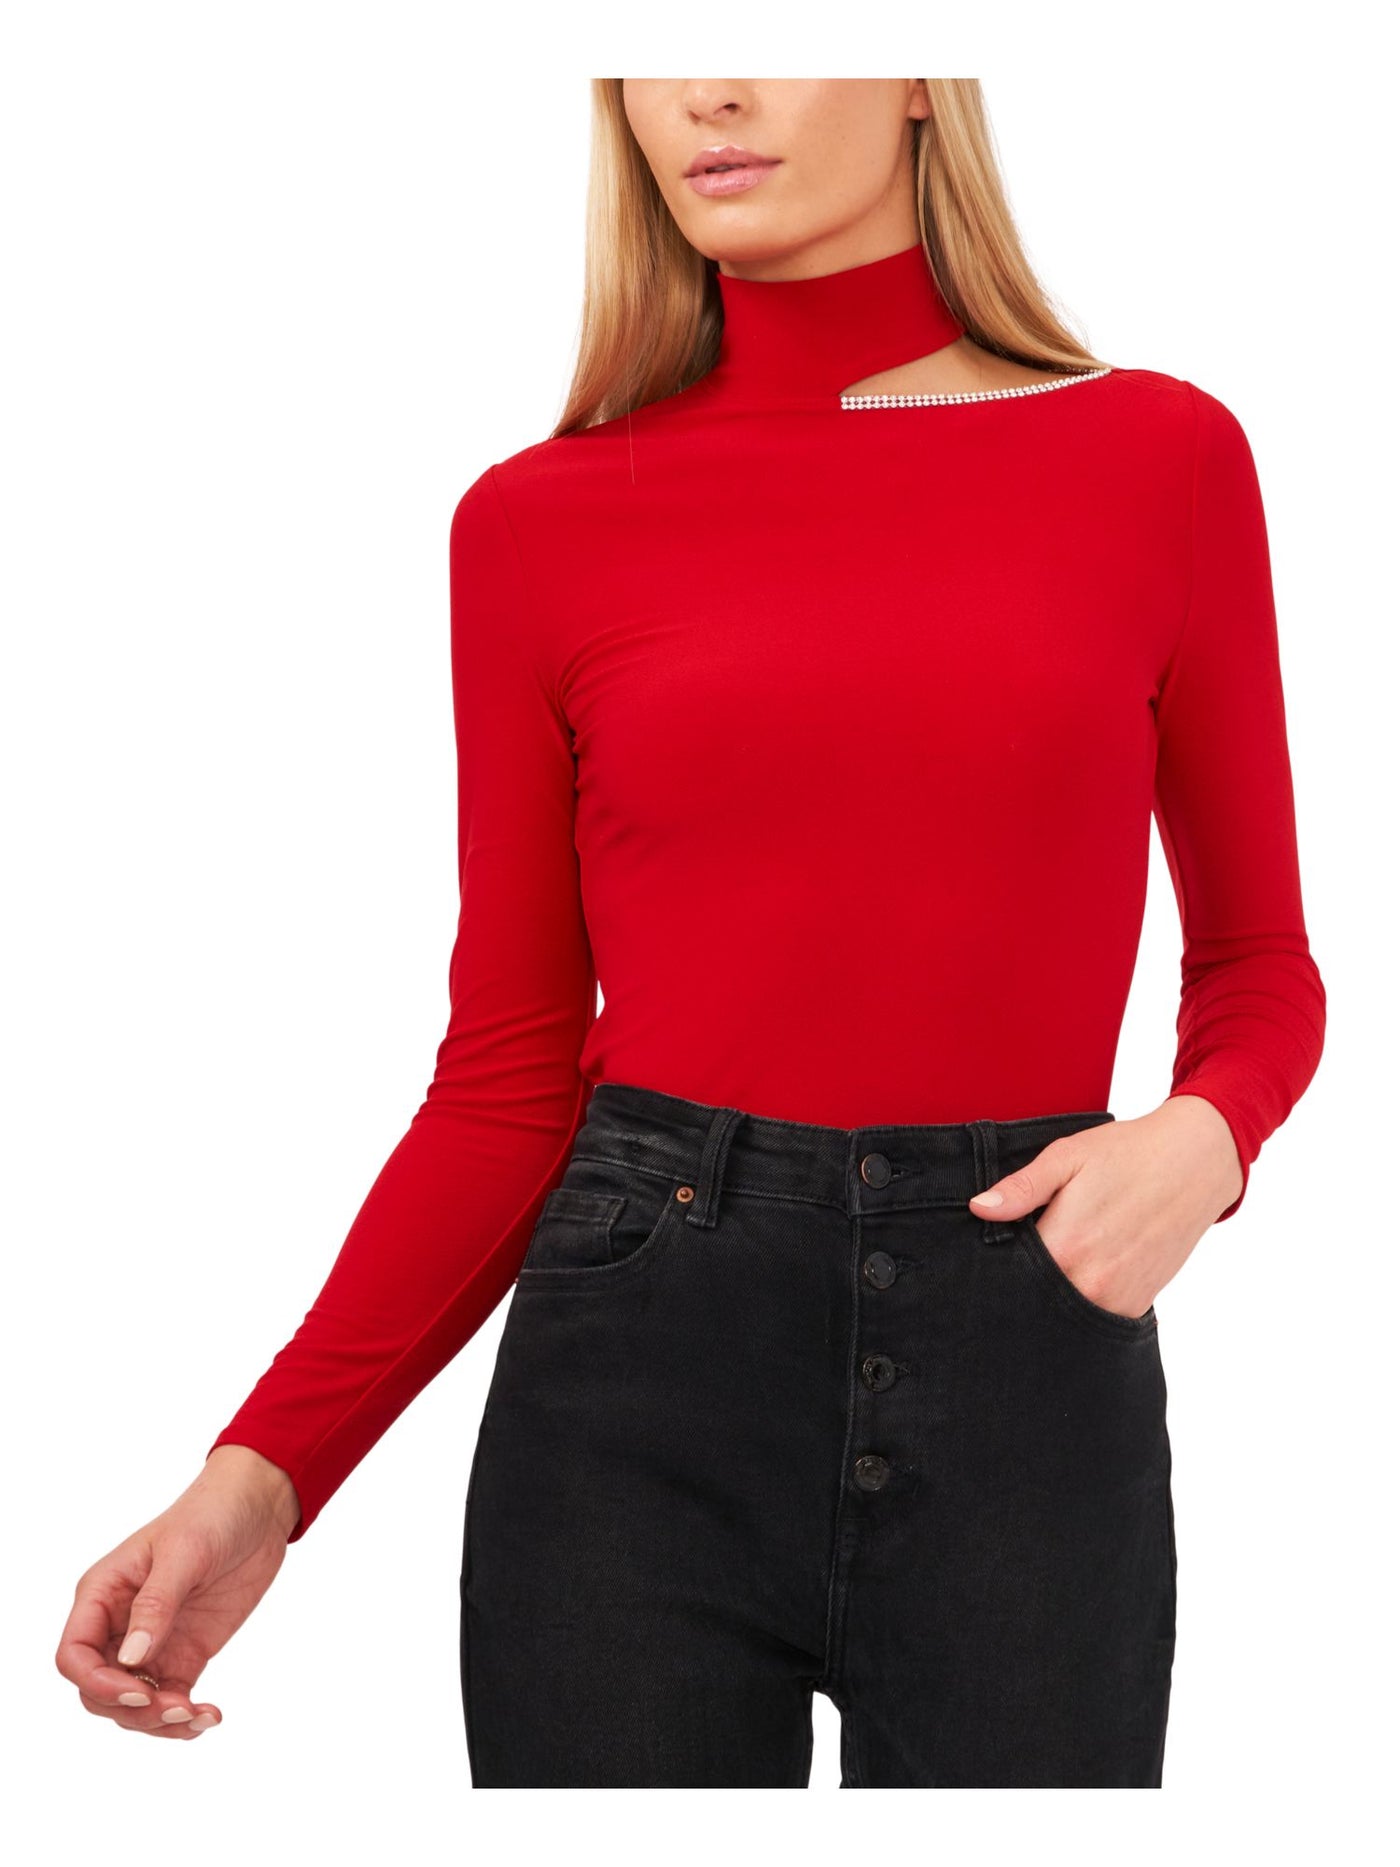 28TH & PARK Womens Red Cut Out Rhinestone Fitted Long Sleeve Mock Neck Top Juniors S